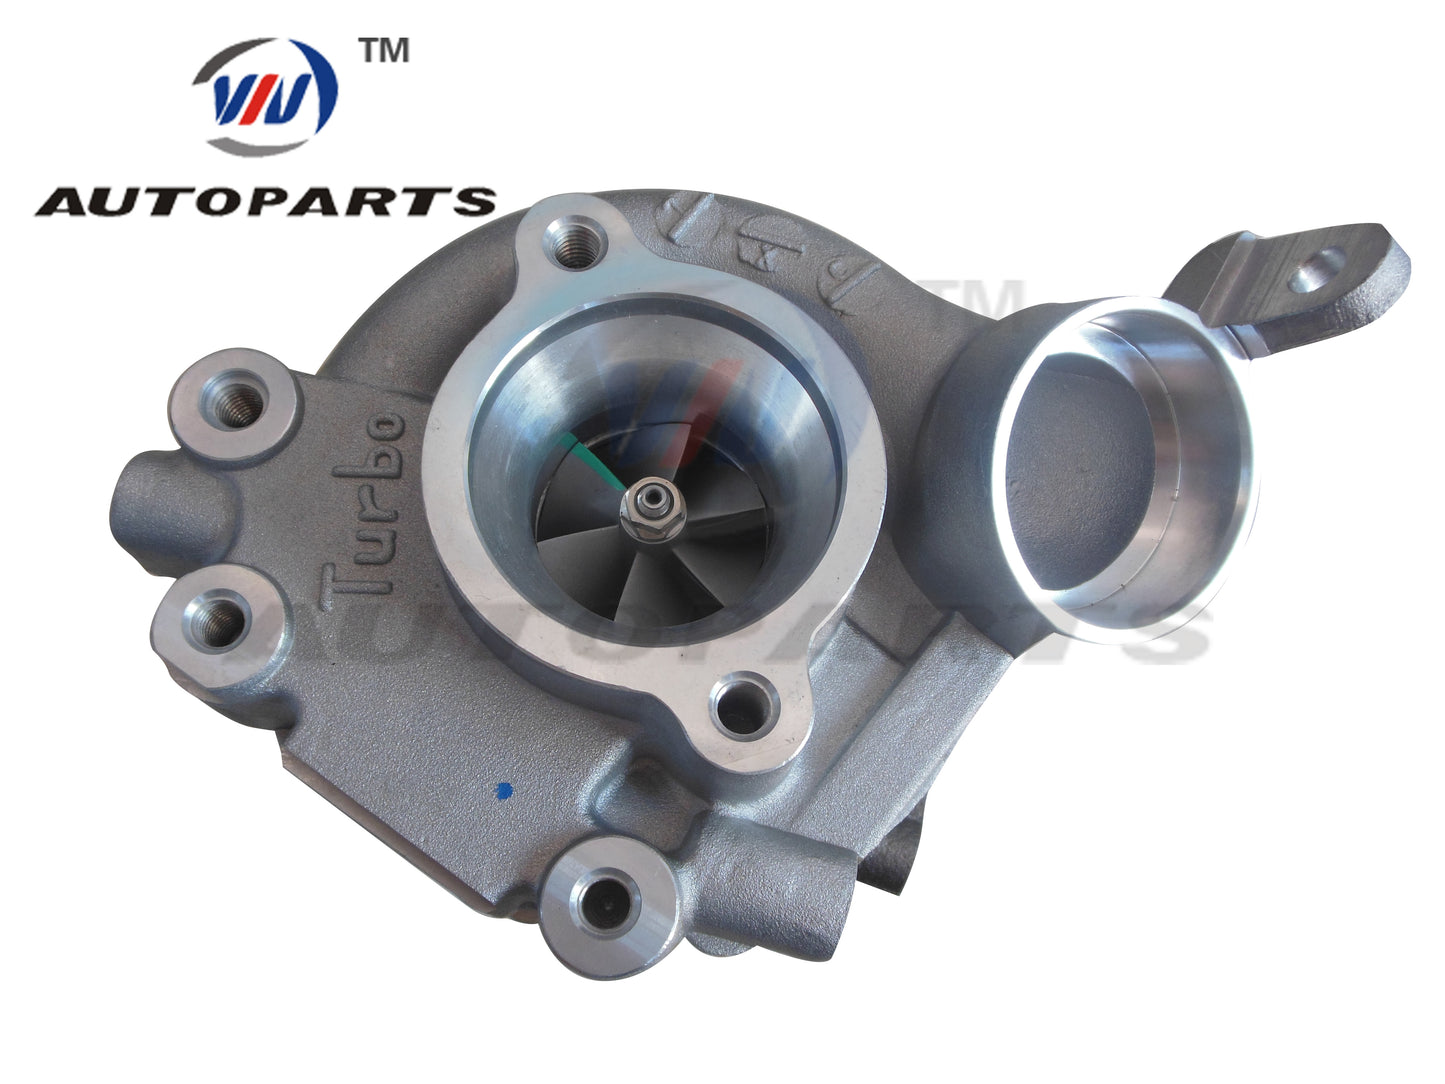 Turbocharger 775095-5001S for Toyota Land Cruiser 70 Series with 1VD-FTV EURO IV 4.5L Diesel Engine